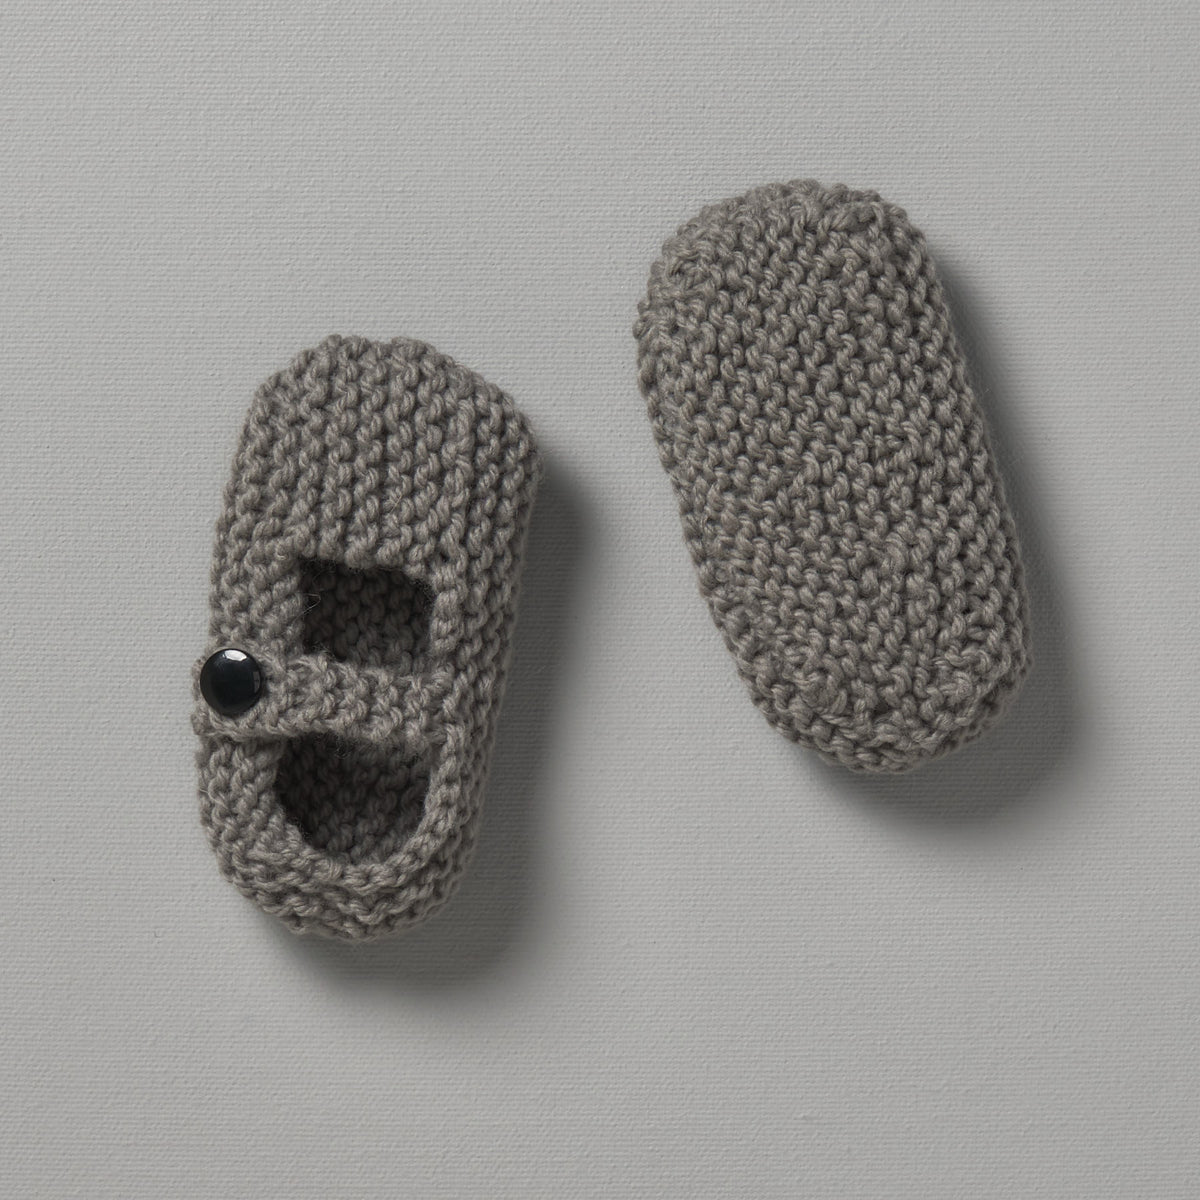 A pair of Weebits Hand Knitted Mary Jane Shoes in Mushroom color on a white surface.